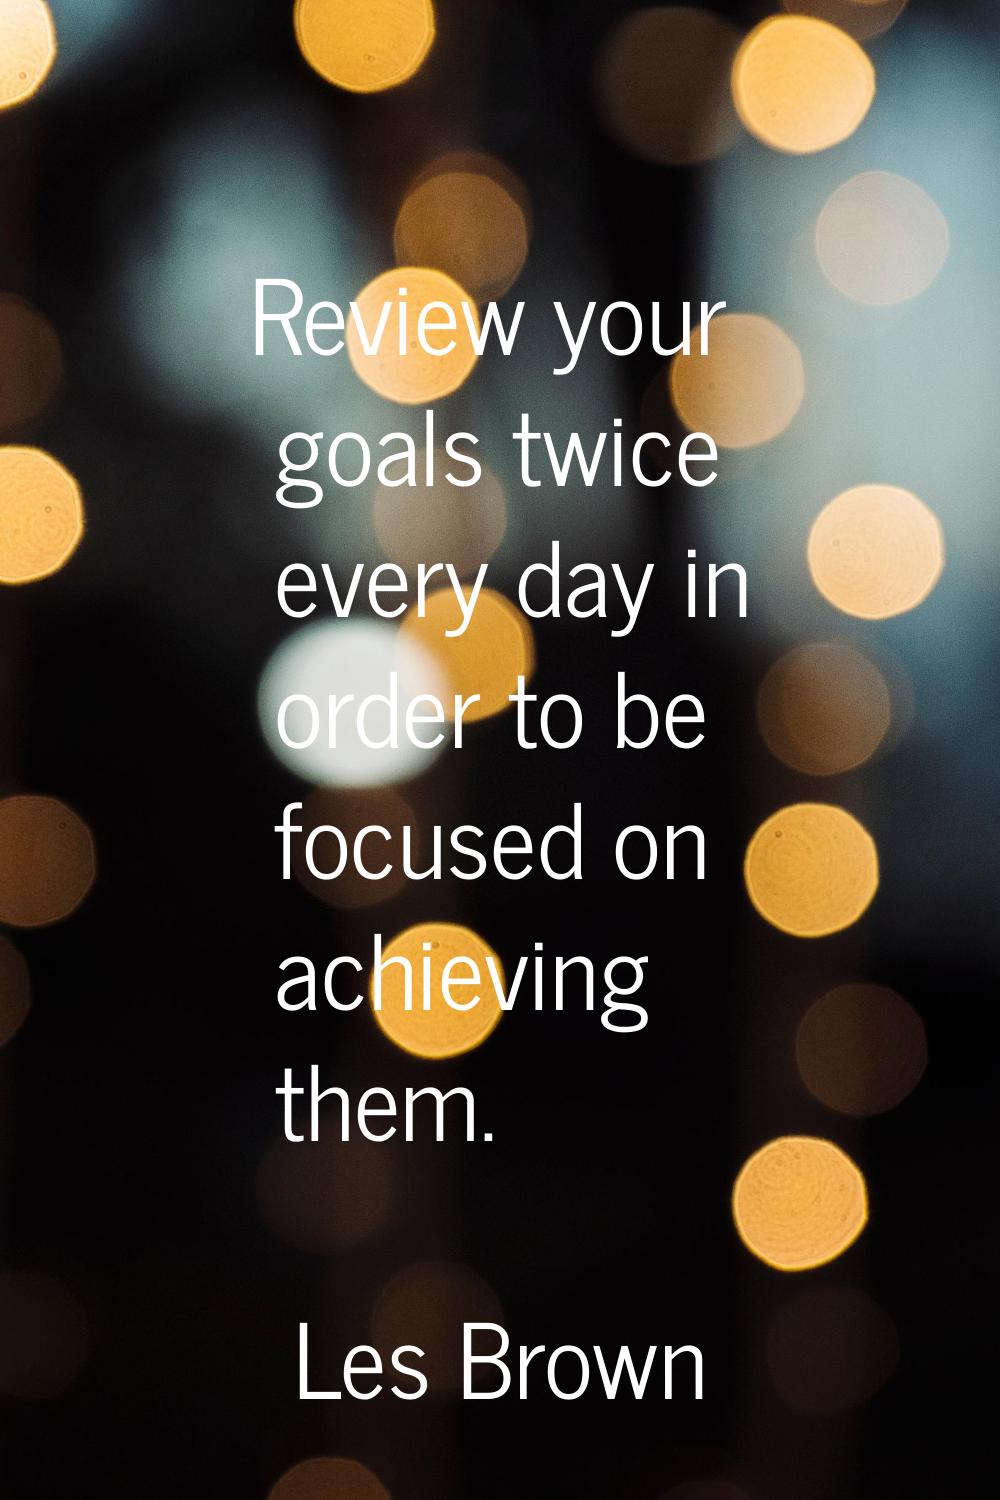 Review your goals twice every day in order to be focused on achieving them.